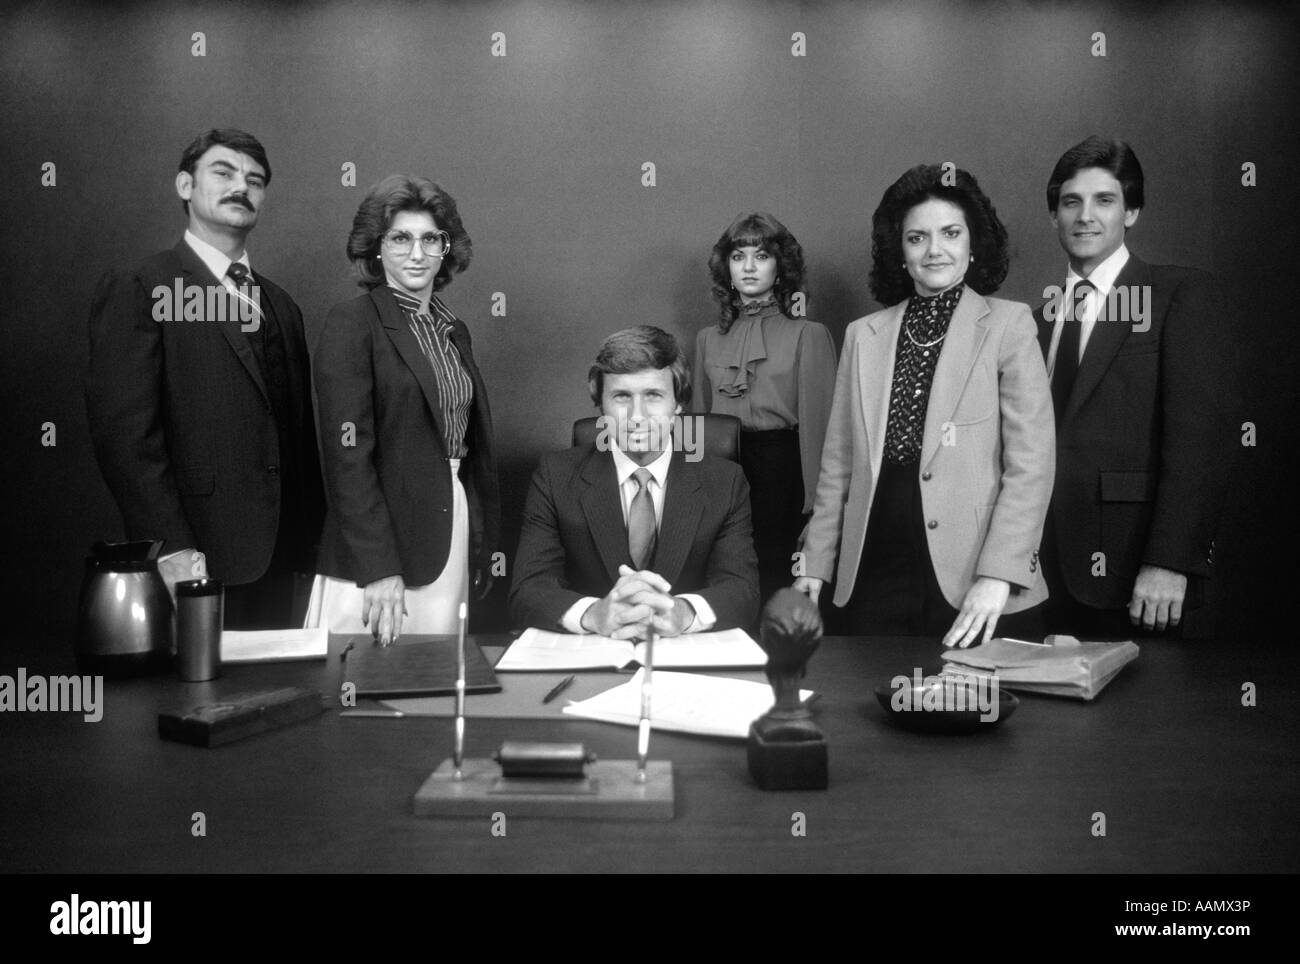 1980s GROUP PORTRAIT OF OFFICE STAFF STANDING BEHIND DESK AROUND BOSS WITH SERIOUS EXPRESSIONS Stock Photo